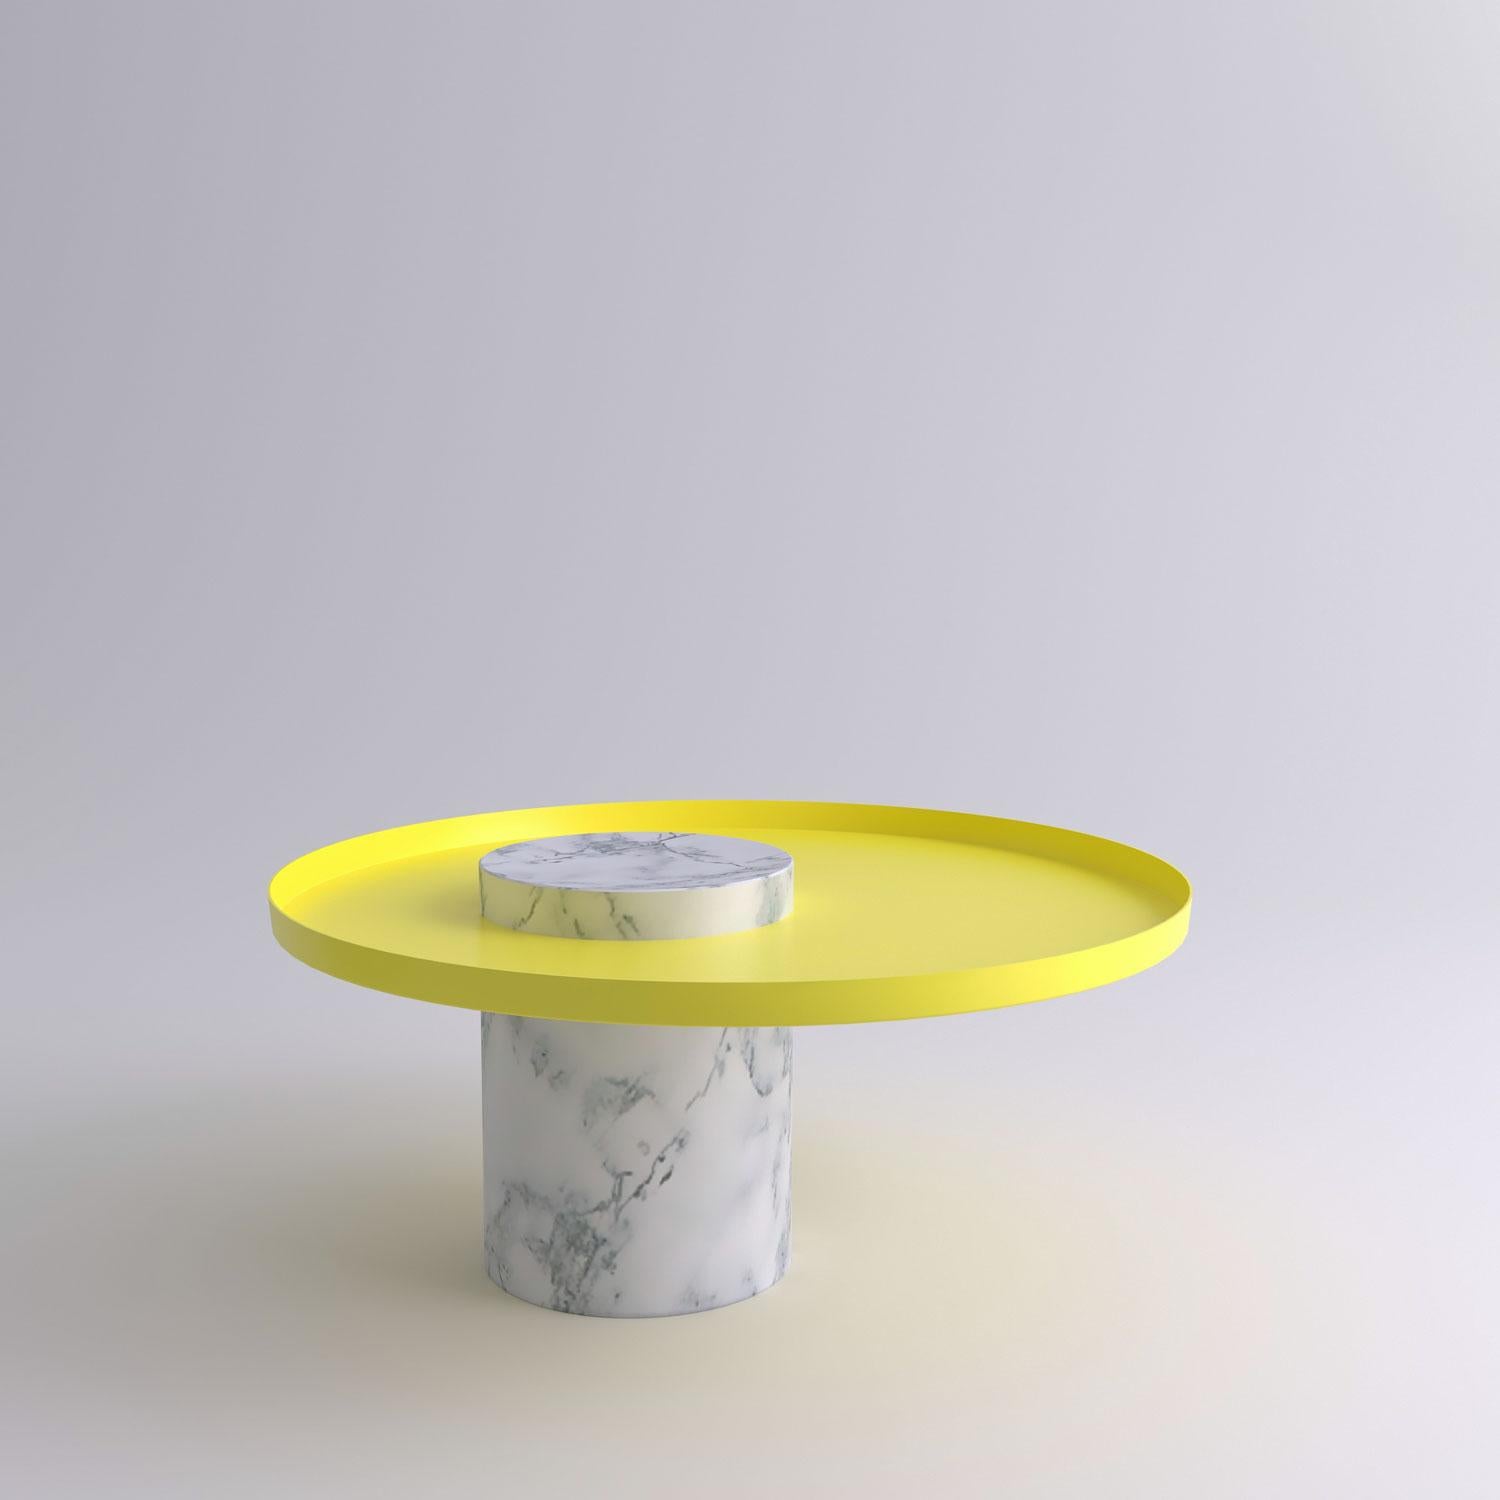 Low white marble contemporary guéridon, Sebastian Herkner
Dimensions: D 70 x H 33 cm
Materials: Pele de Tigre marble, yellow metal tray

The salute table exists in 3 sizes, 4 different marble stones for the column and 5 different finishes for